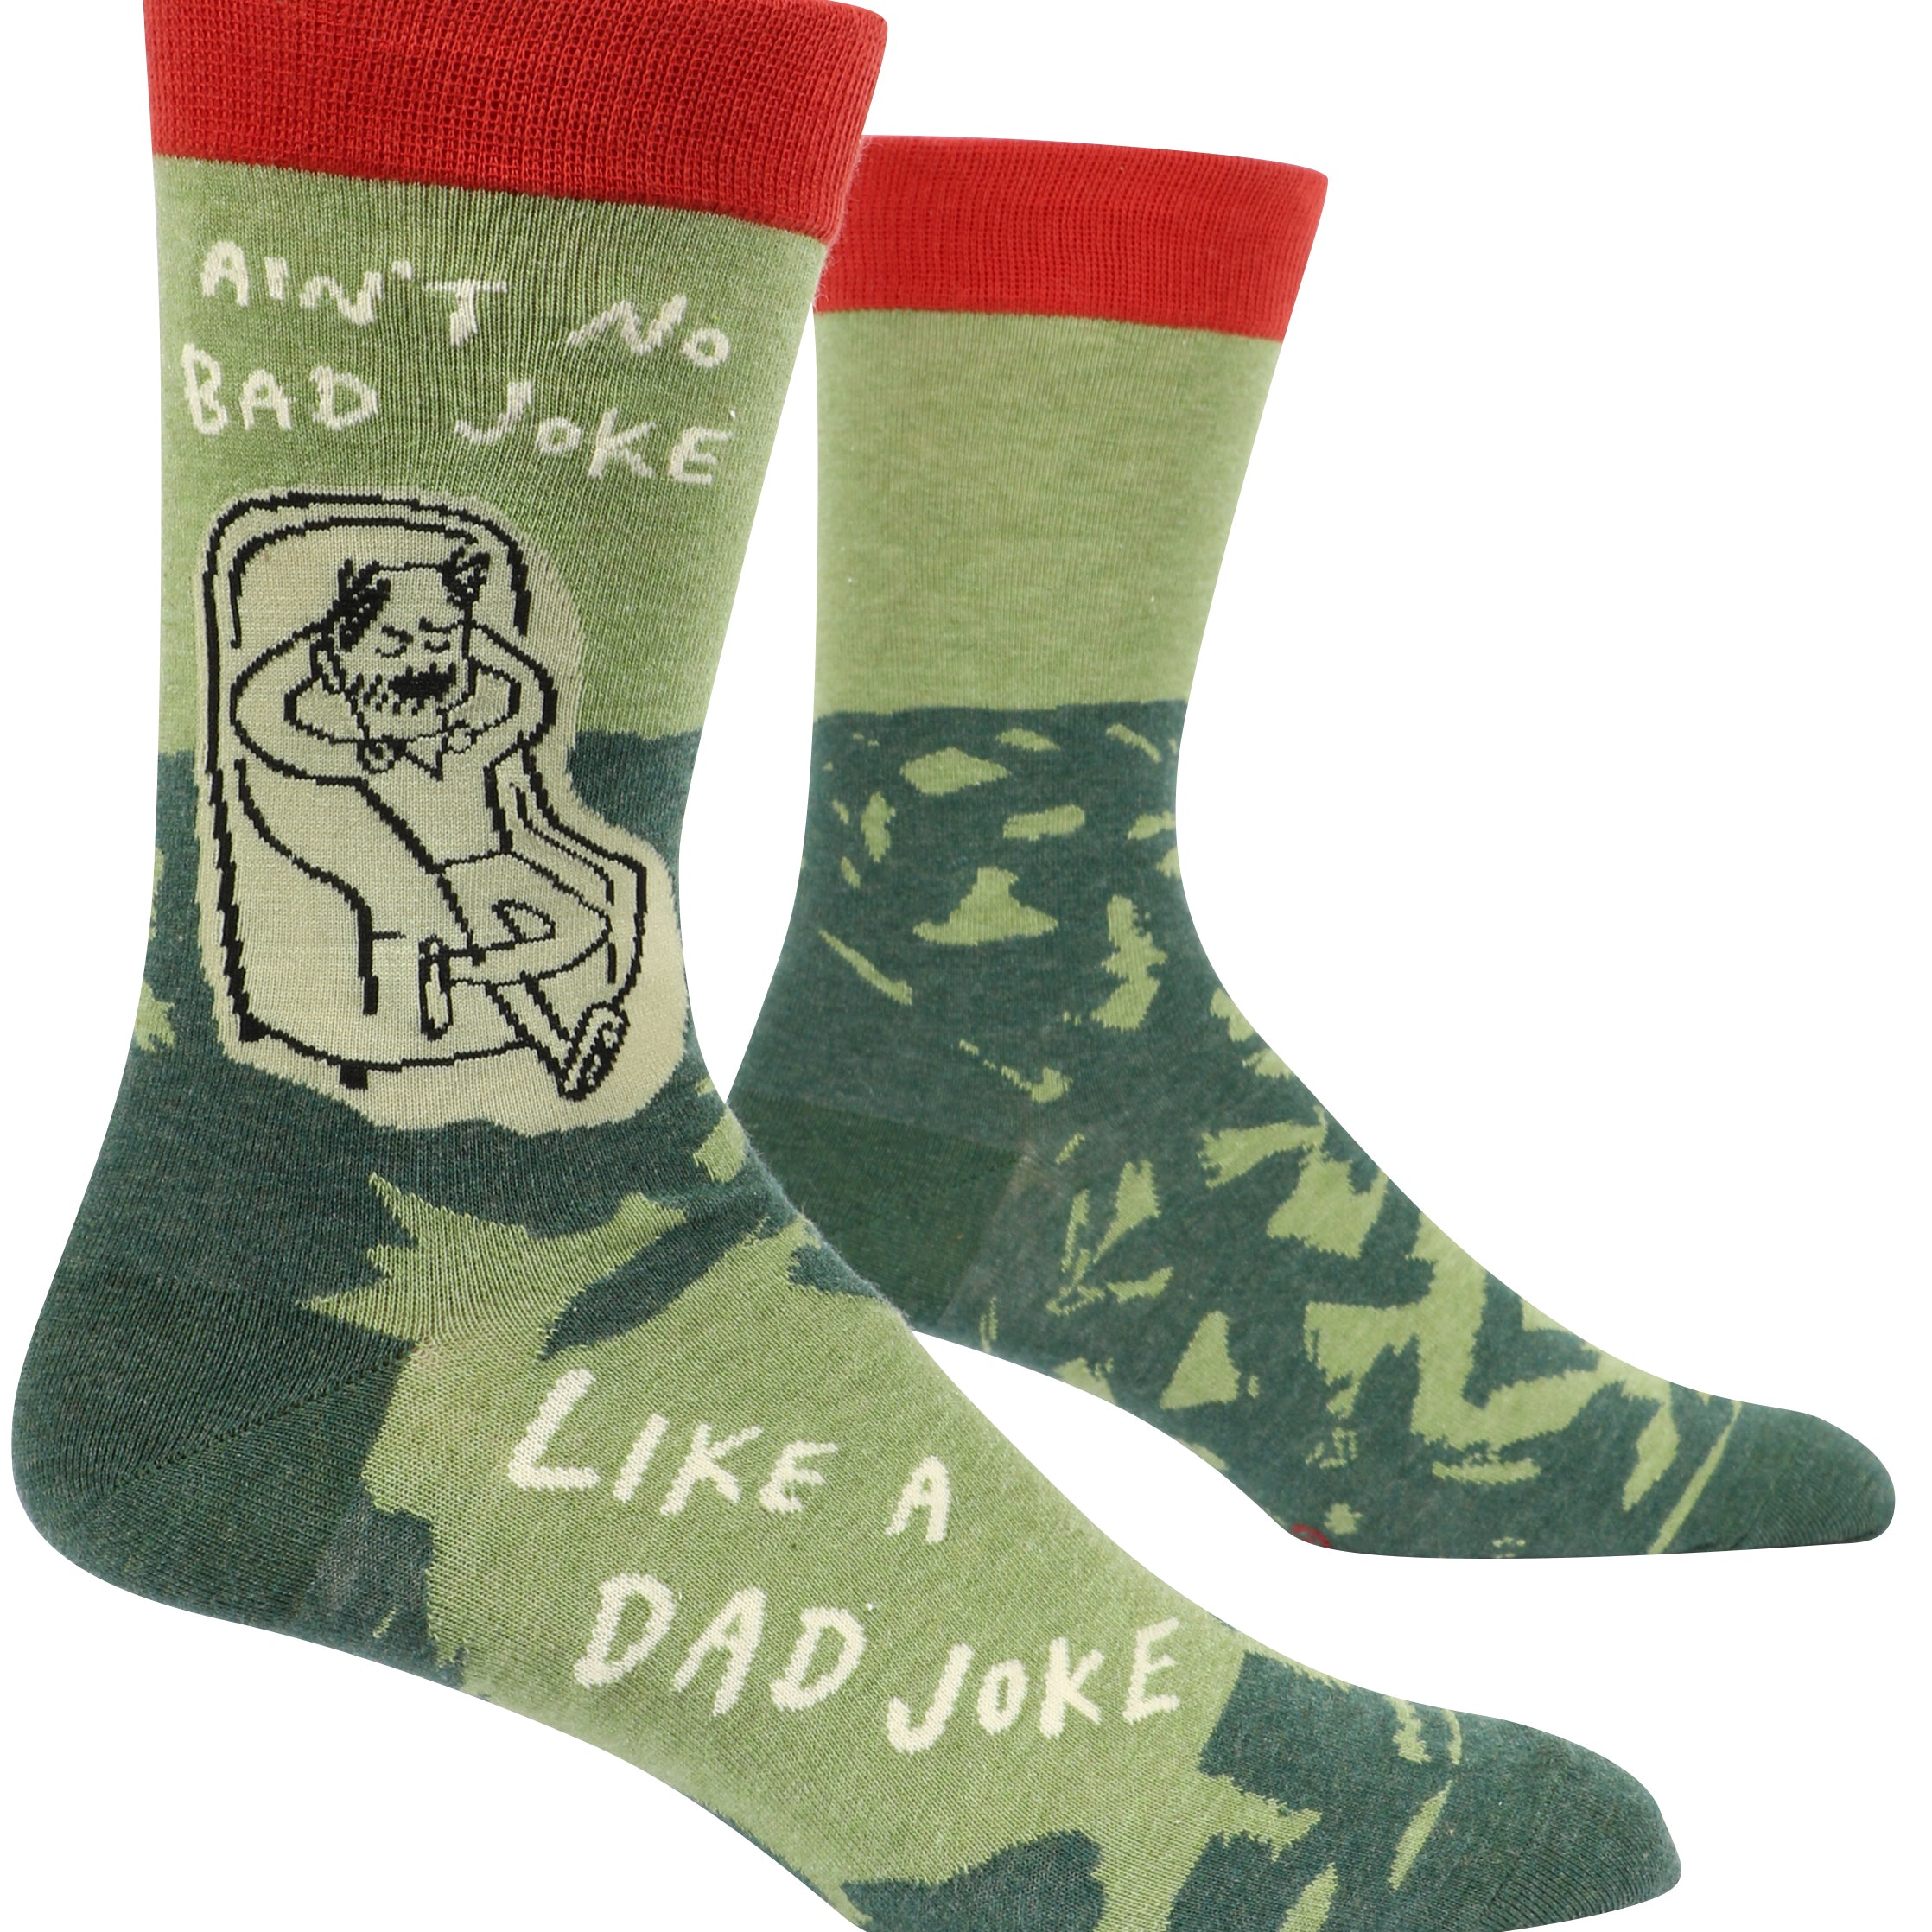 green socks with red ankle stripe picture of a dad sitting in chair and it says ain't no bad joke like a dad joke